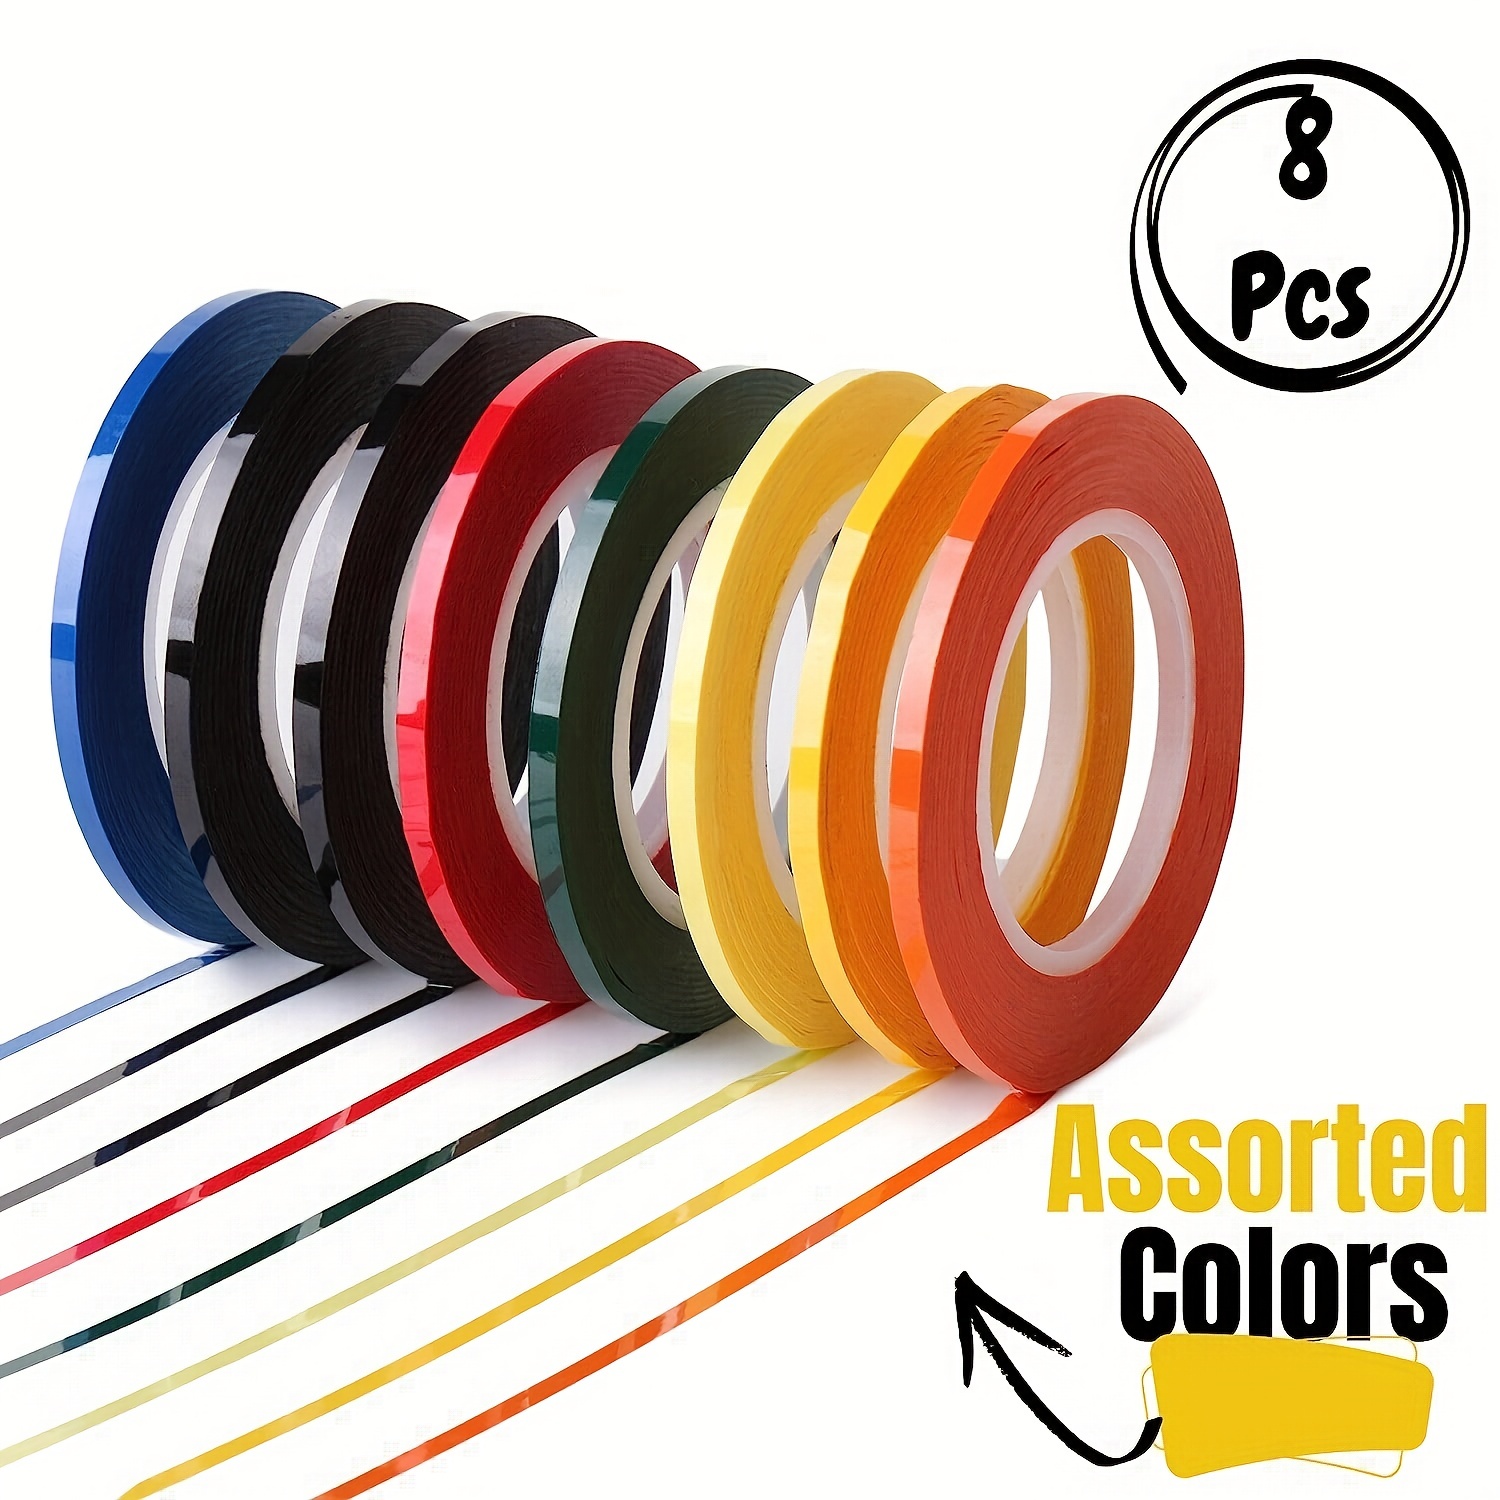 Dry Erase Tape  Graphic Products